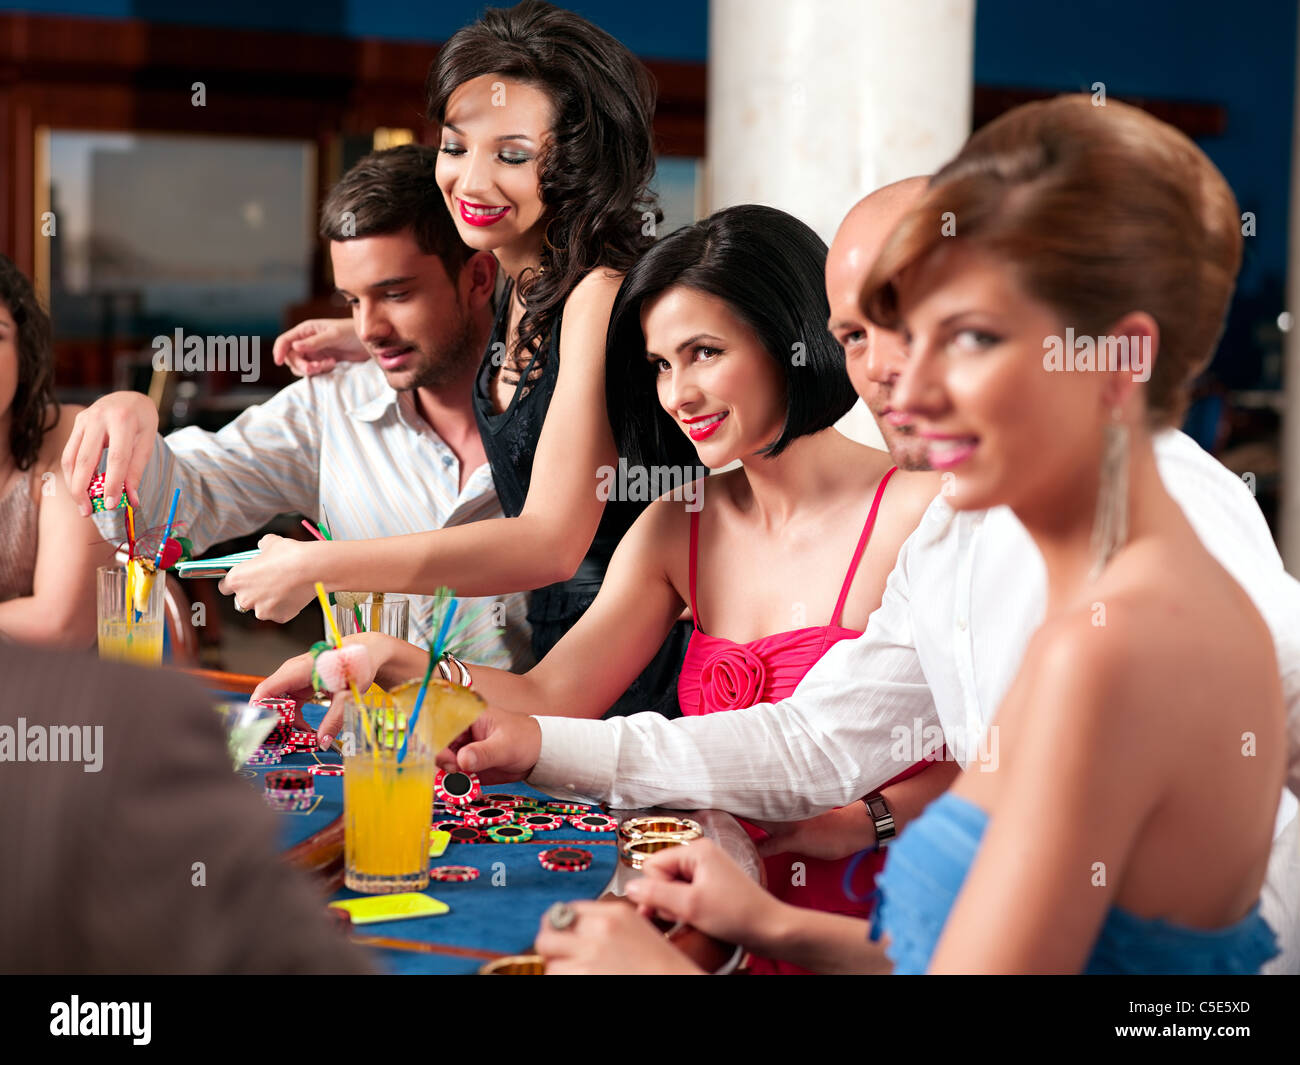 group of people playing blackjack or poker, smiling Stock Photo